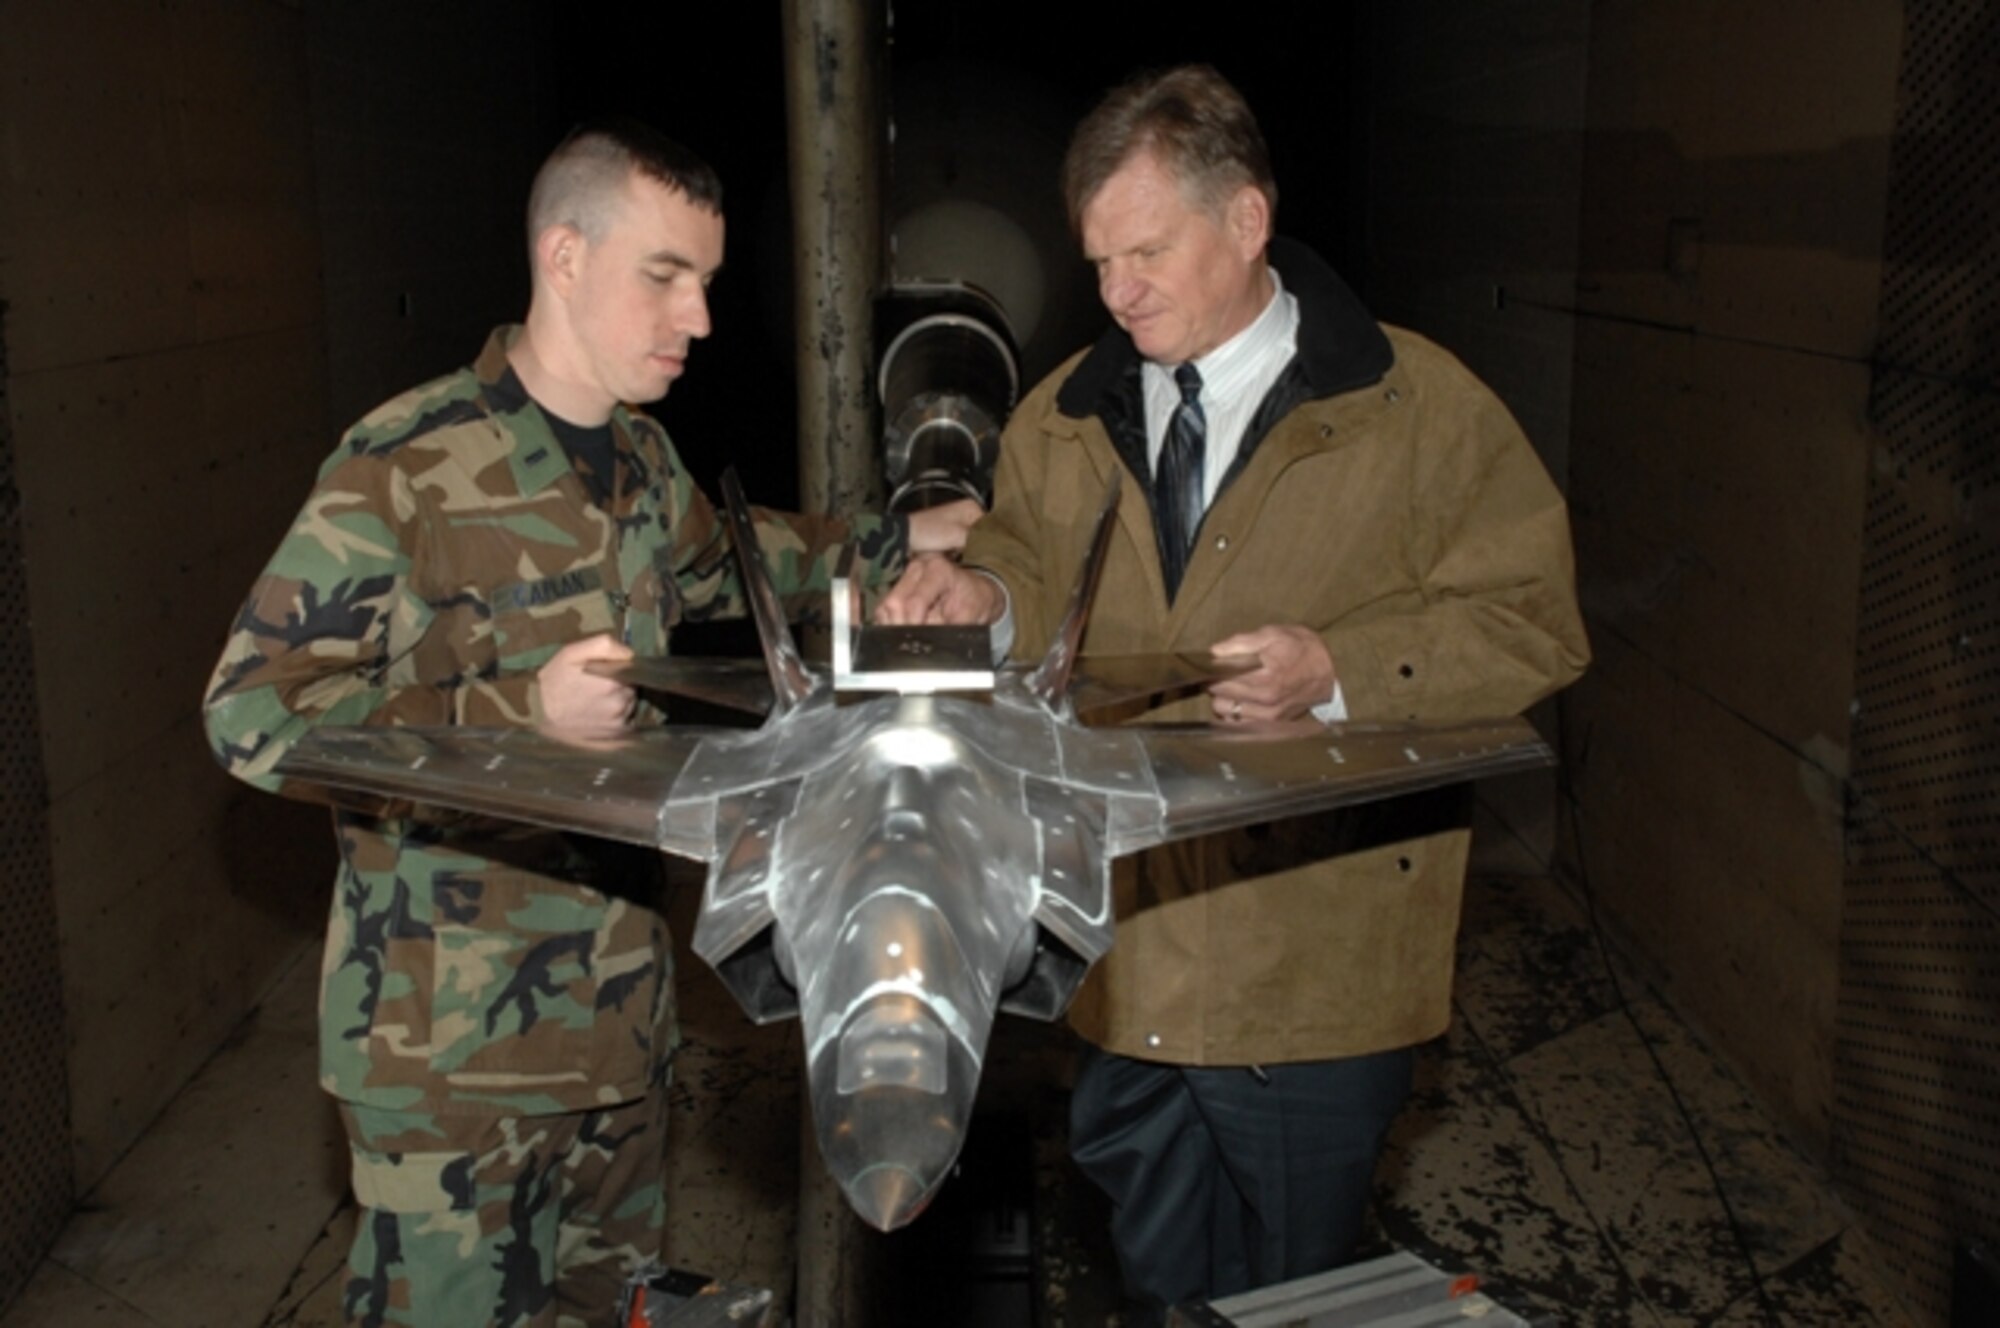 First Lt. Ezra Caplan and Aerospace Testing Alliance Senior Project Engineer Charlie Smith examine a 1/12th scale model of the Navy variant of the F-35 Lightning II during a break in the final pre-production aerodynamics testing done on all F-35 variants here at Arnold Engineering Development Center, Arnold Air Force Base, Tenn. (Photo by Rick Goodfriend)